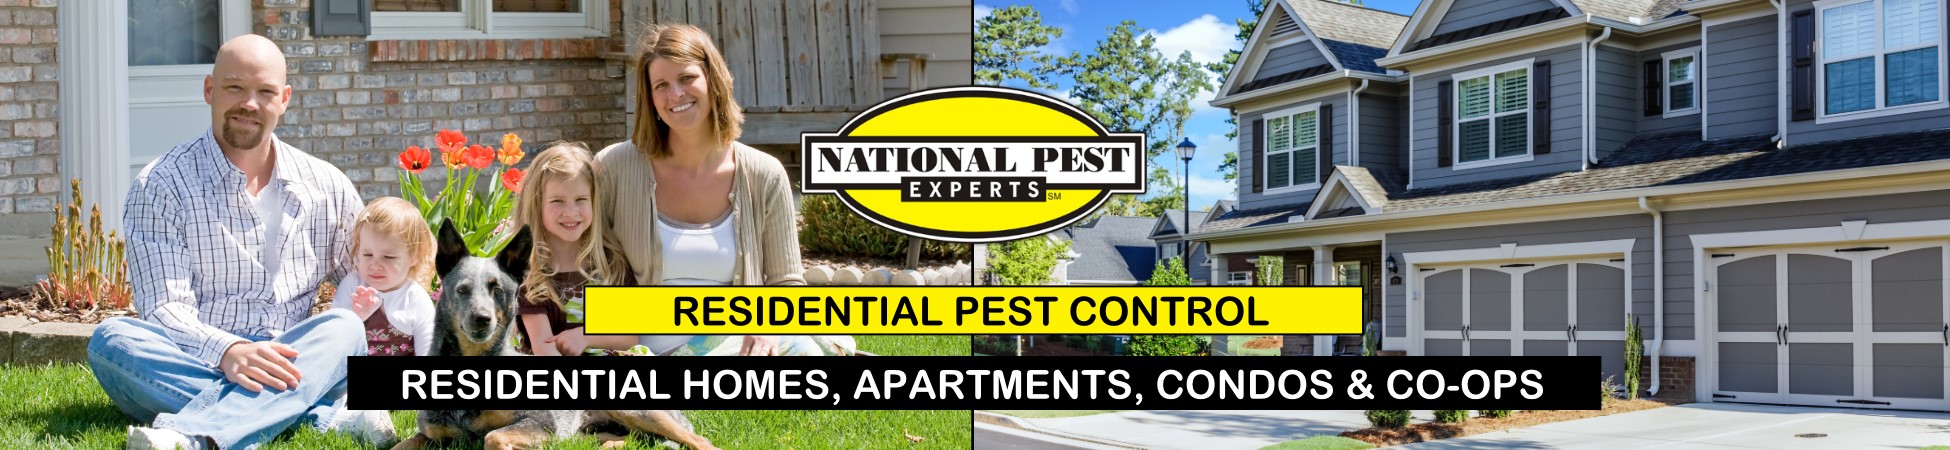 National Pest Experts - Residential exterminating and pest control in Nissequogue, NY